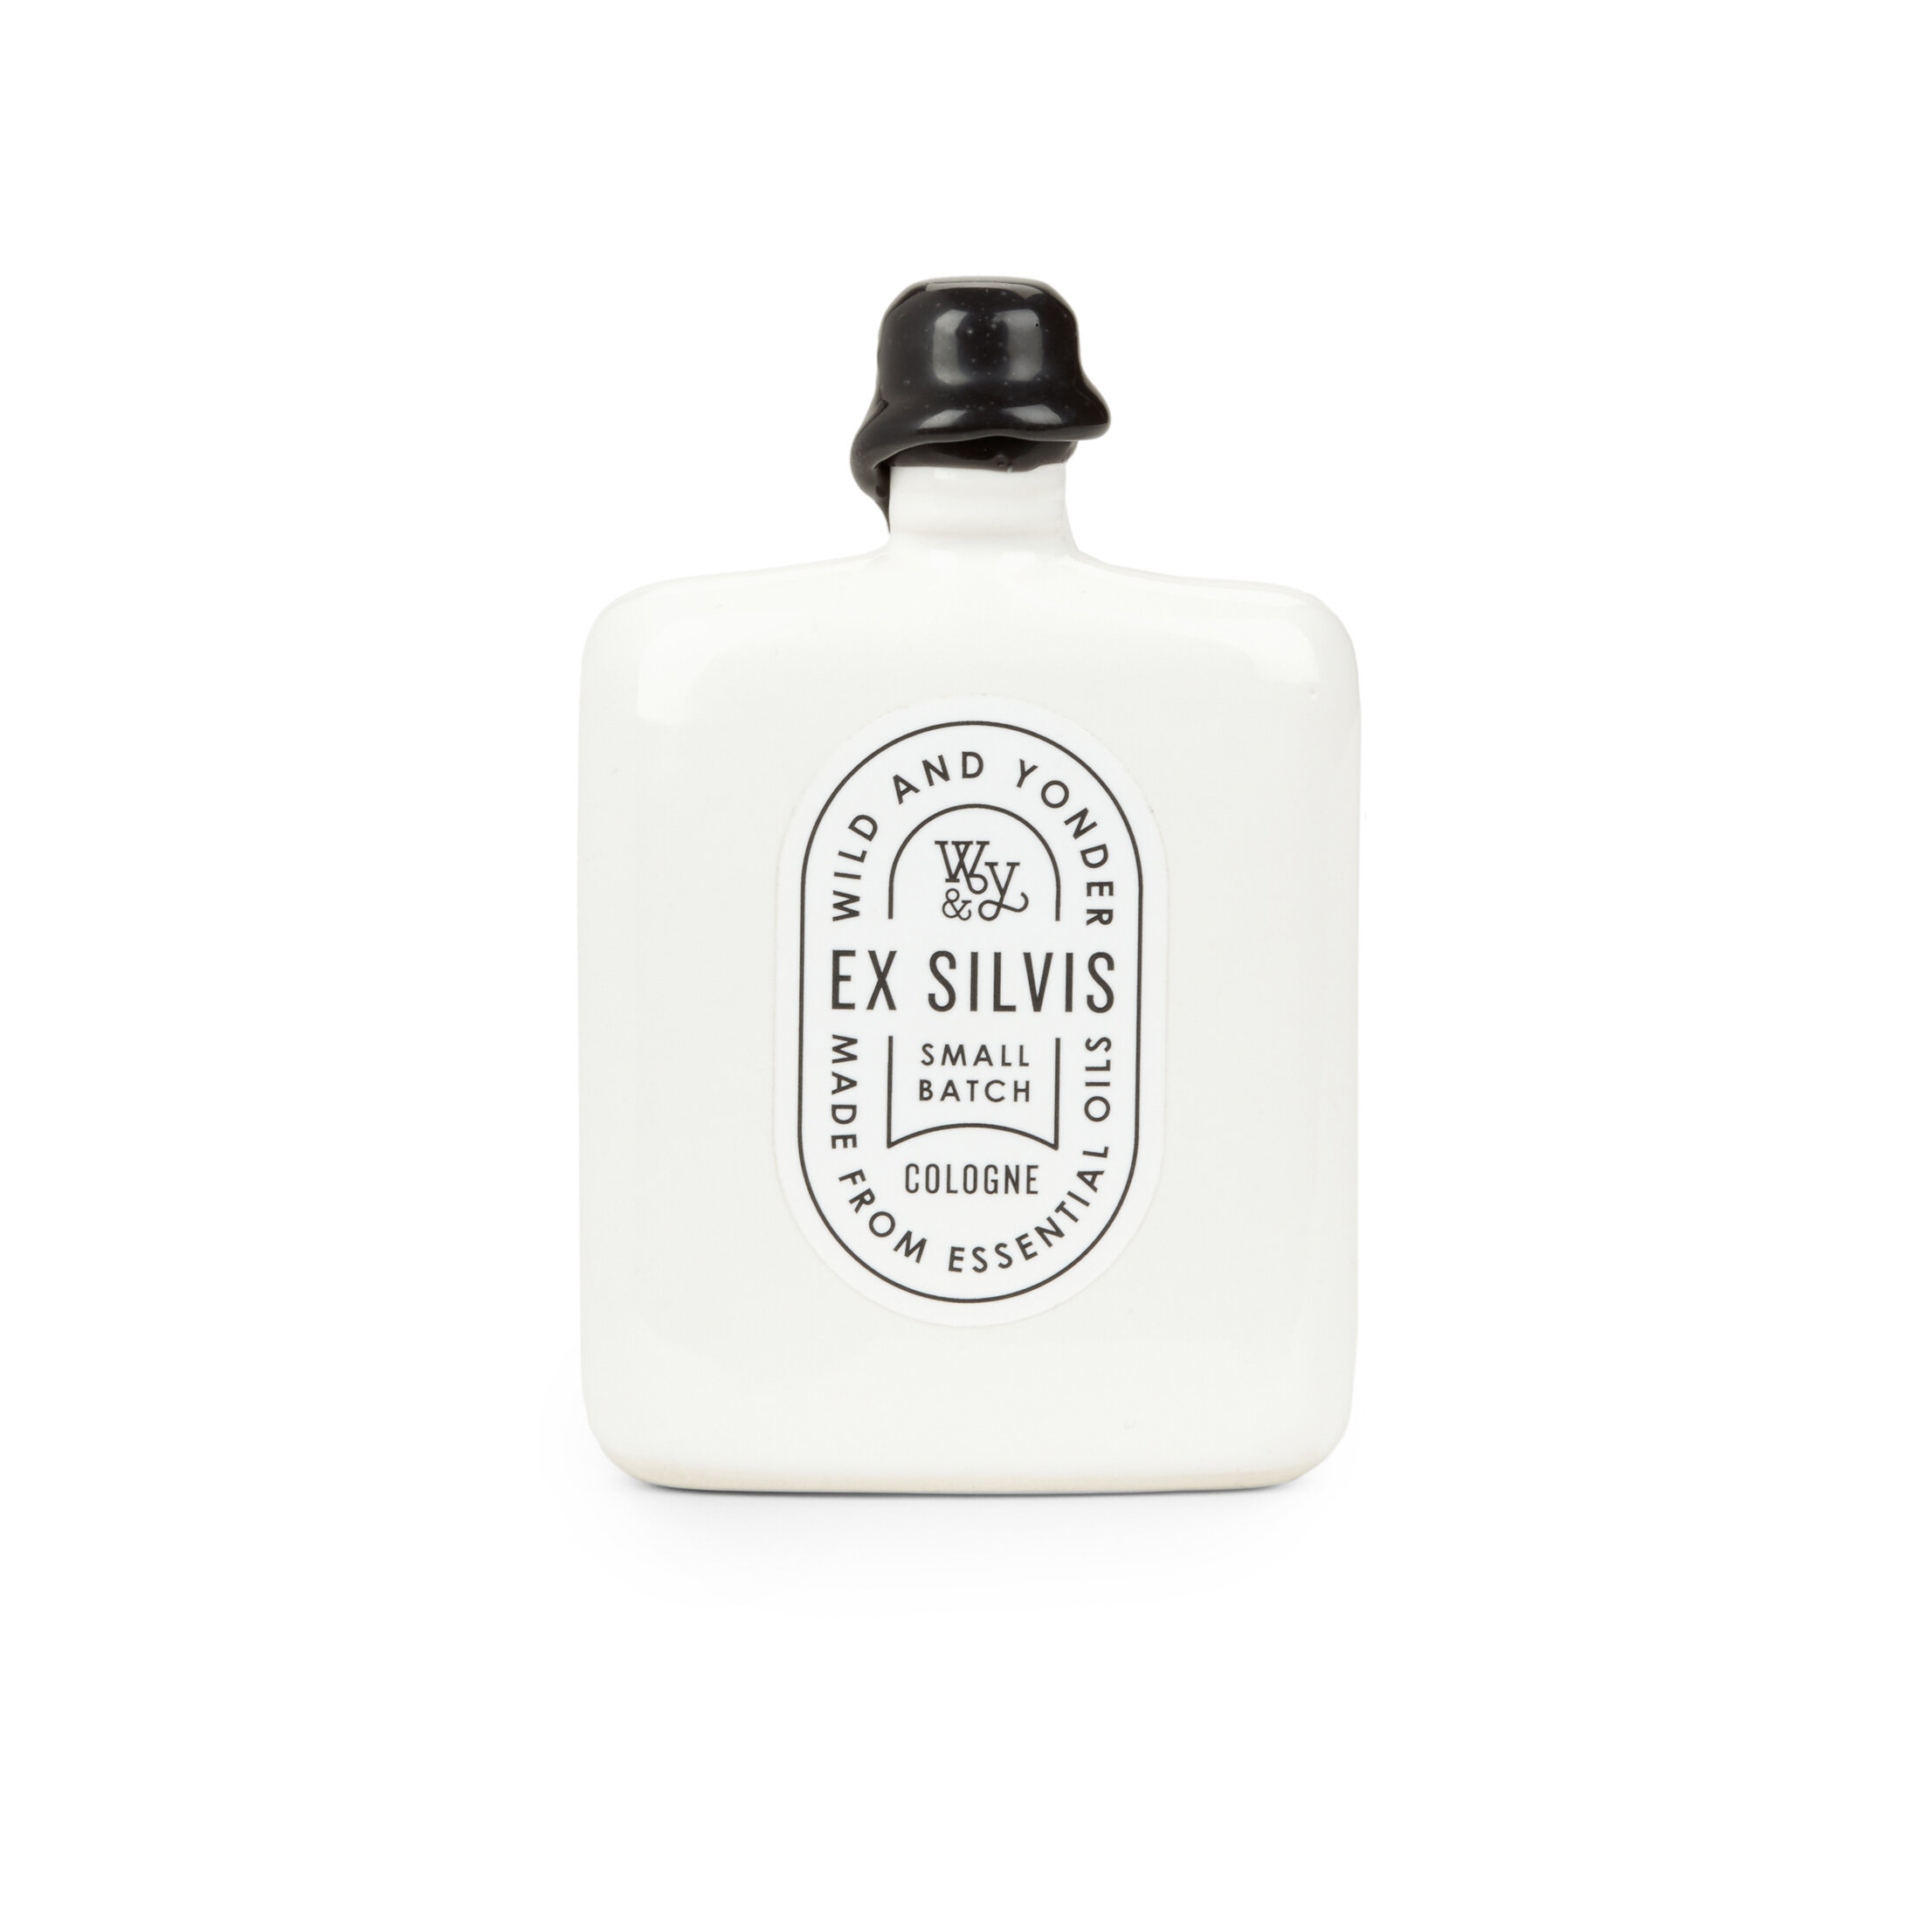 on-white-cologne-product-photo-example.JPG